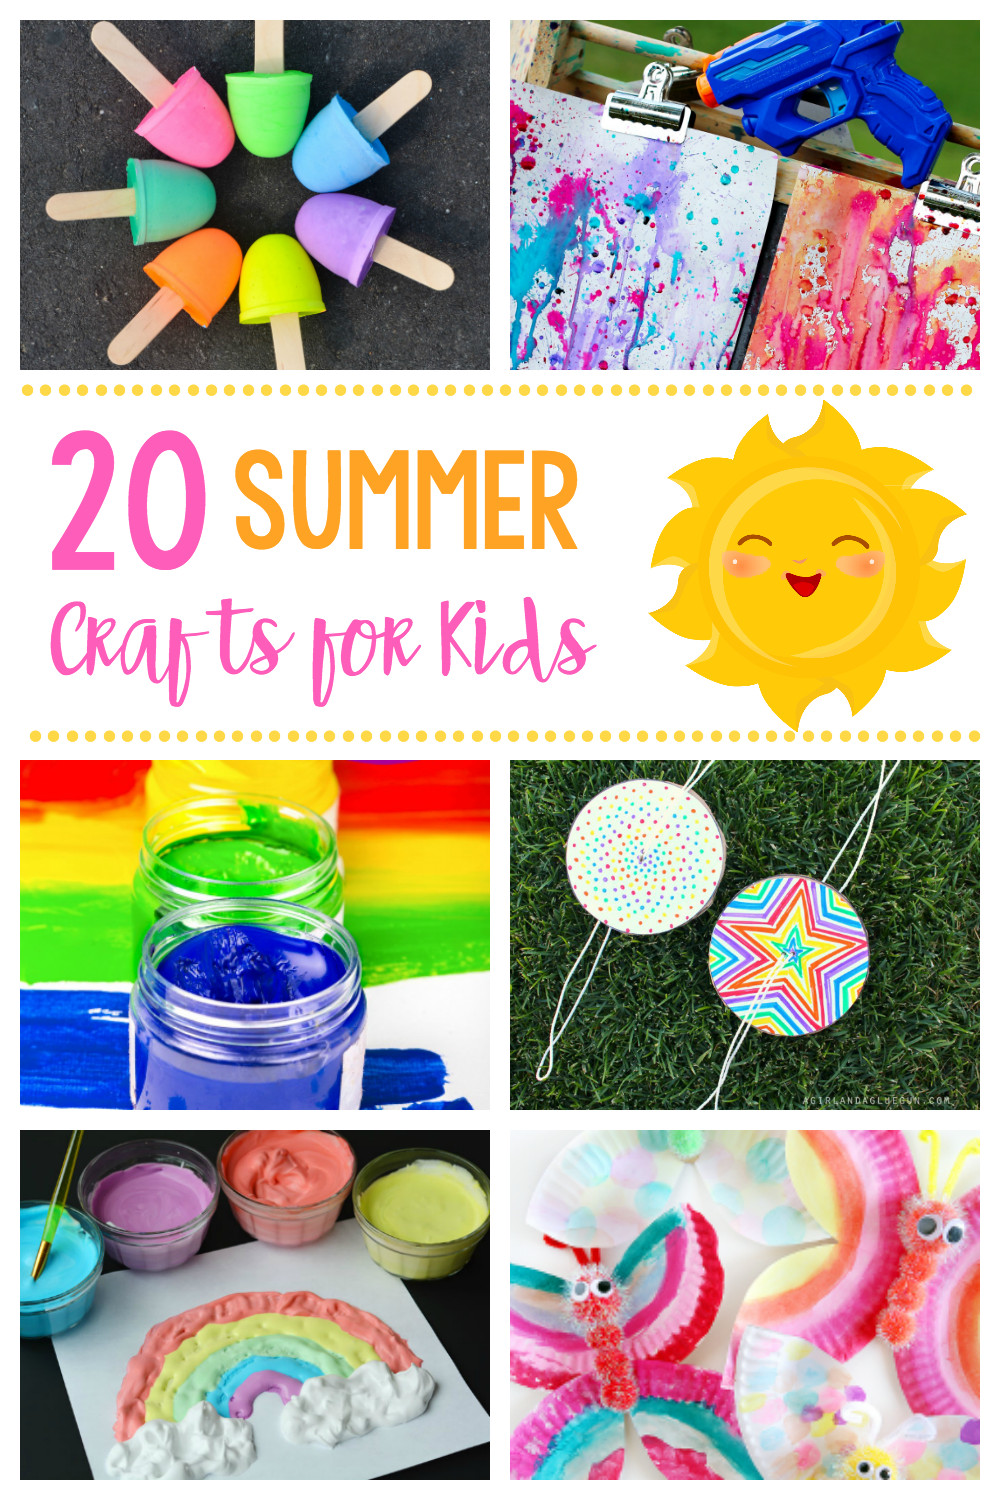 Summer Crafts Ideas For Kids
 20 Simple & Fun Summer Crafts for Kids